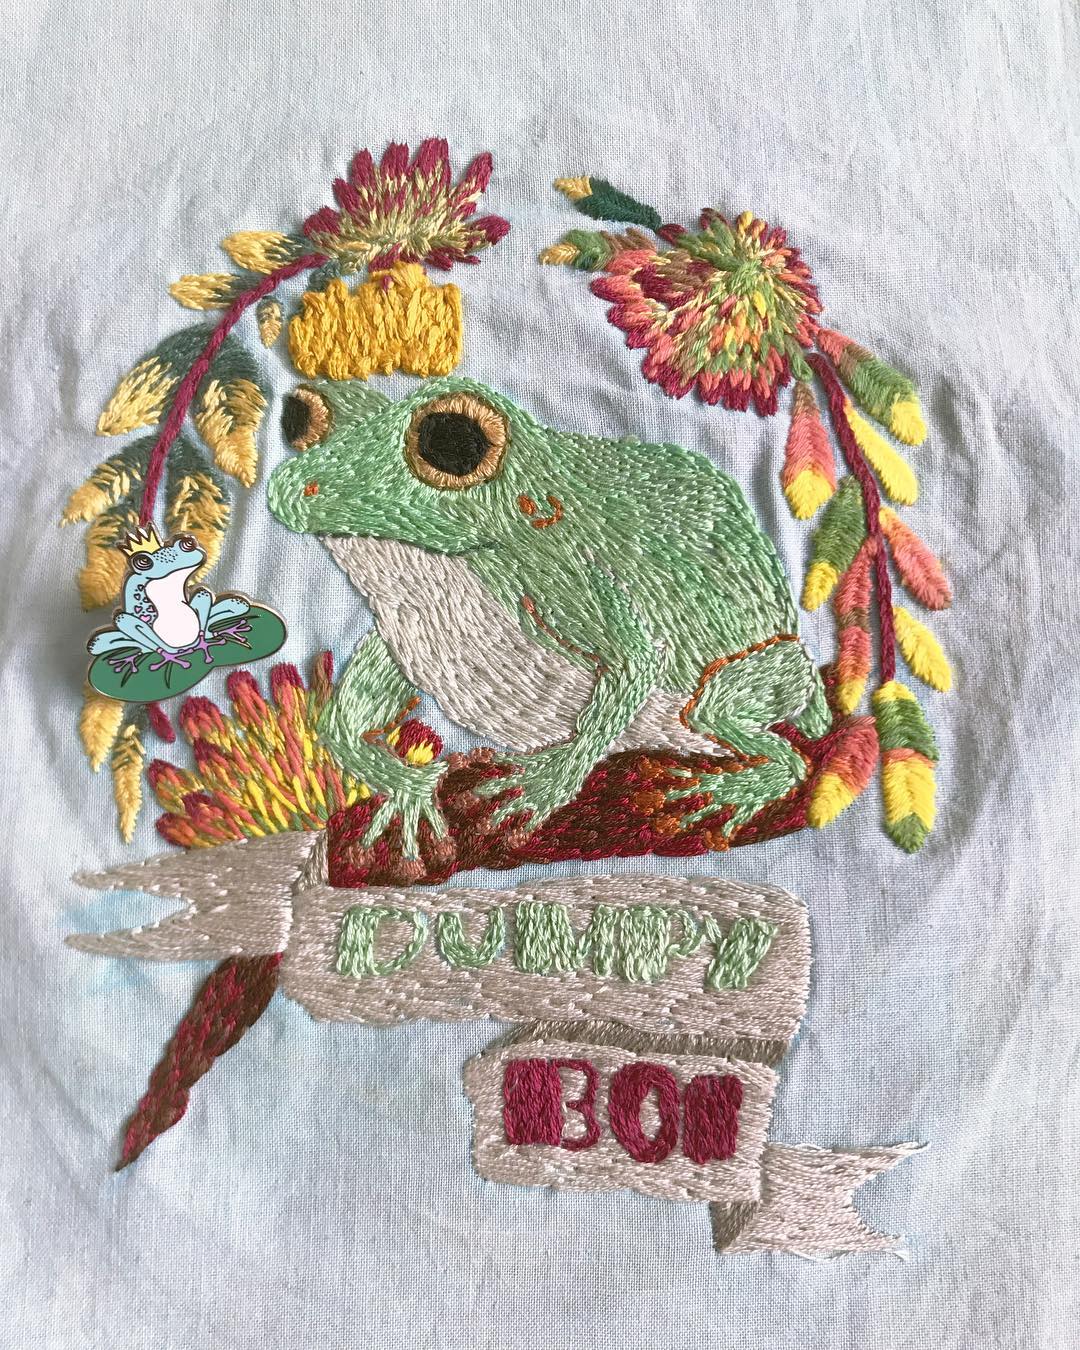 Embroidery of a tree frog around leaves and on a tree branch, with a banner below that reads 'Dumpy Boi' 